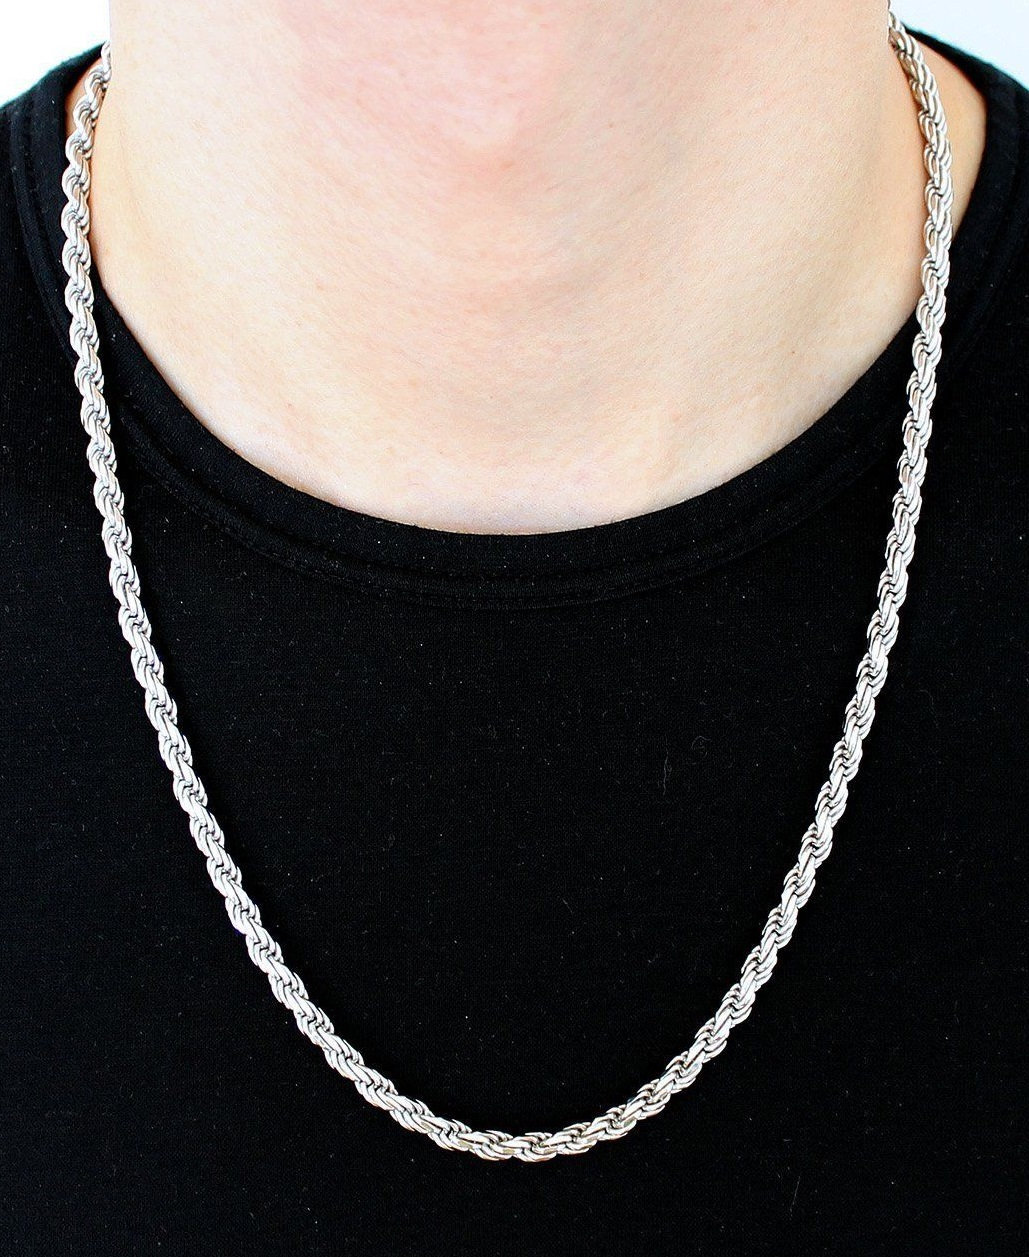 Pure Solid 925 Sterling Silver Singapore Rope Chain Necklace with Lobster Clasp 